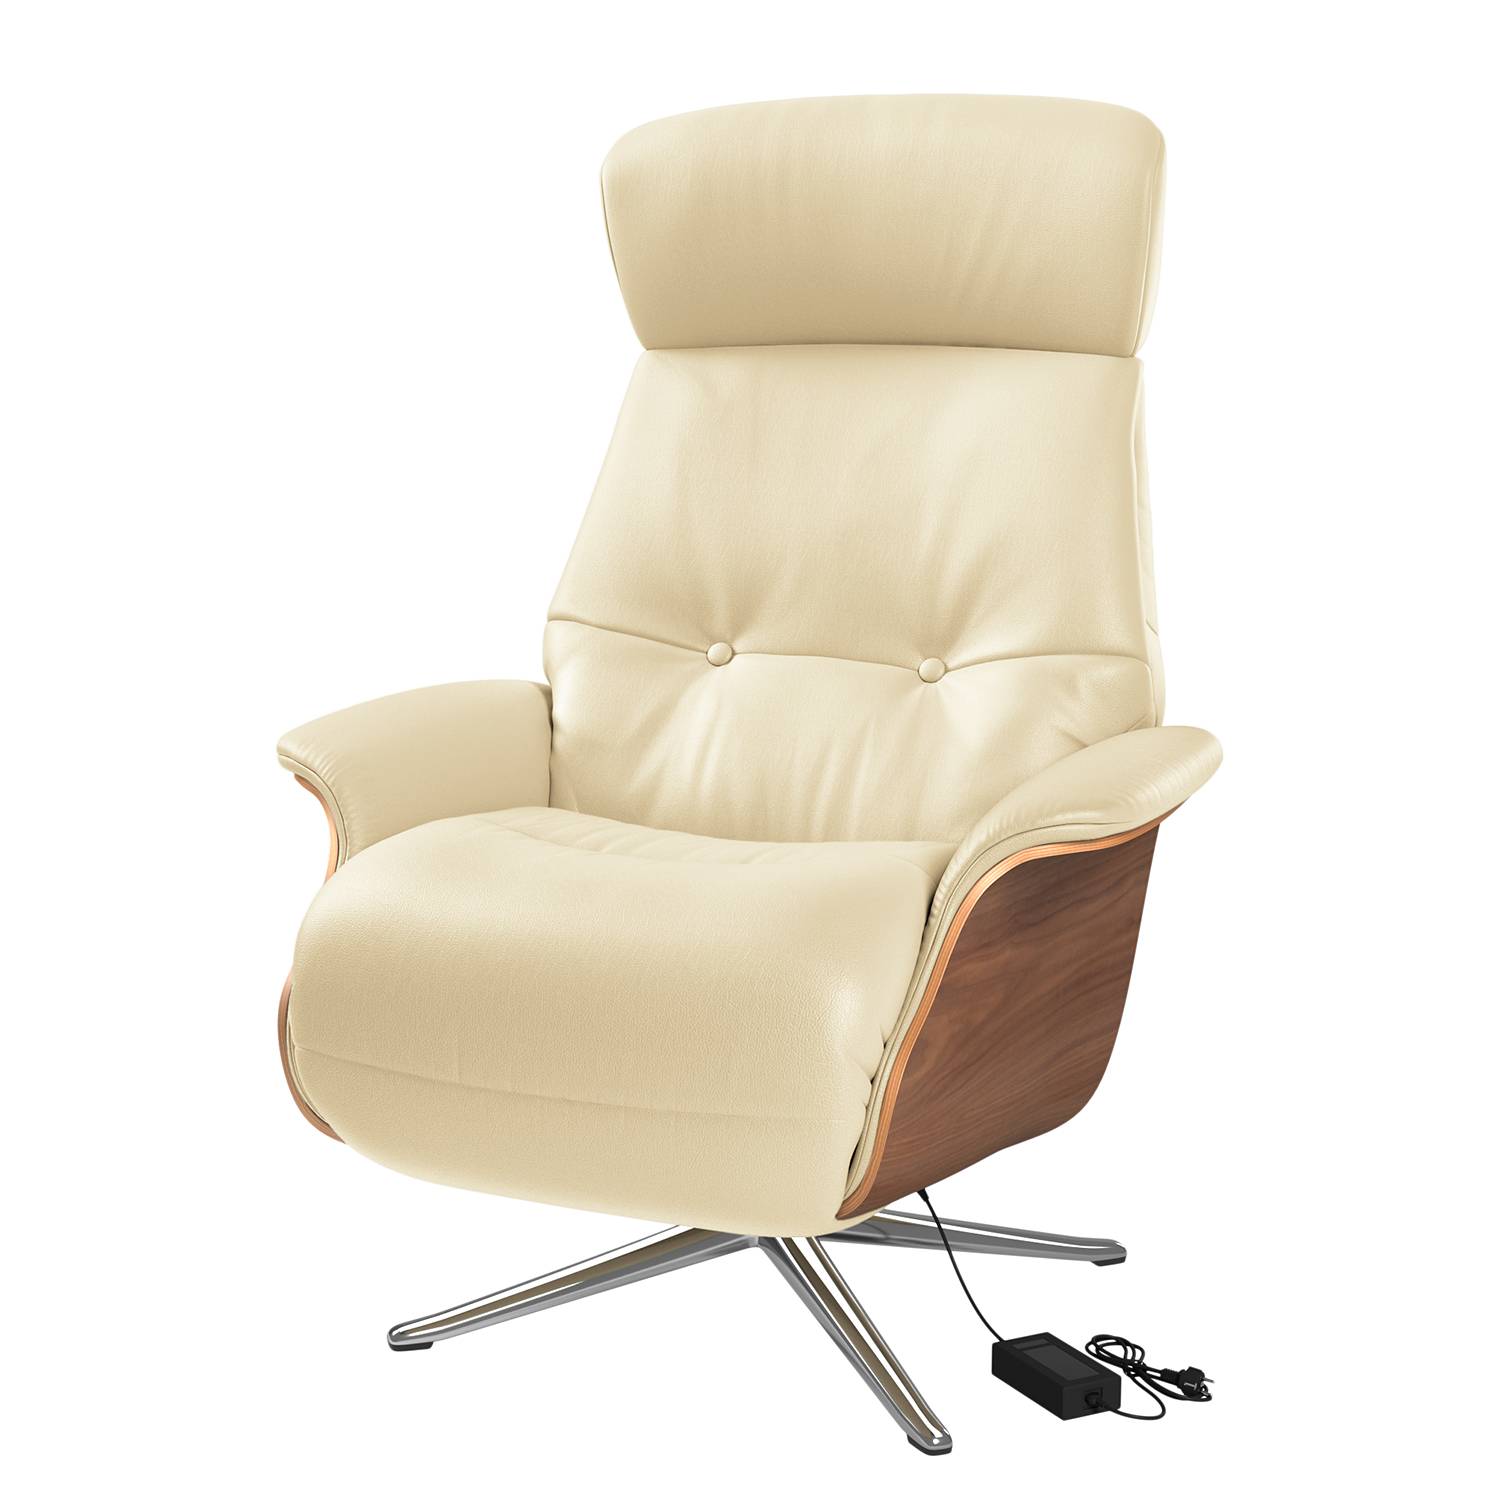 Image of Fauteuil relax Anderson VI 000000001000131423